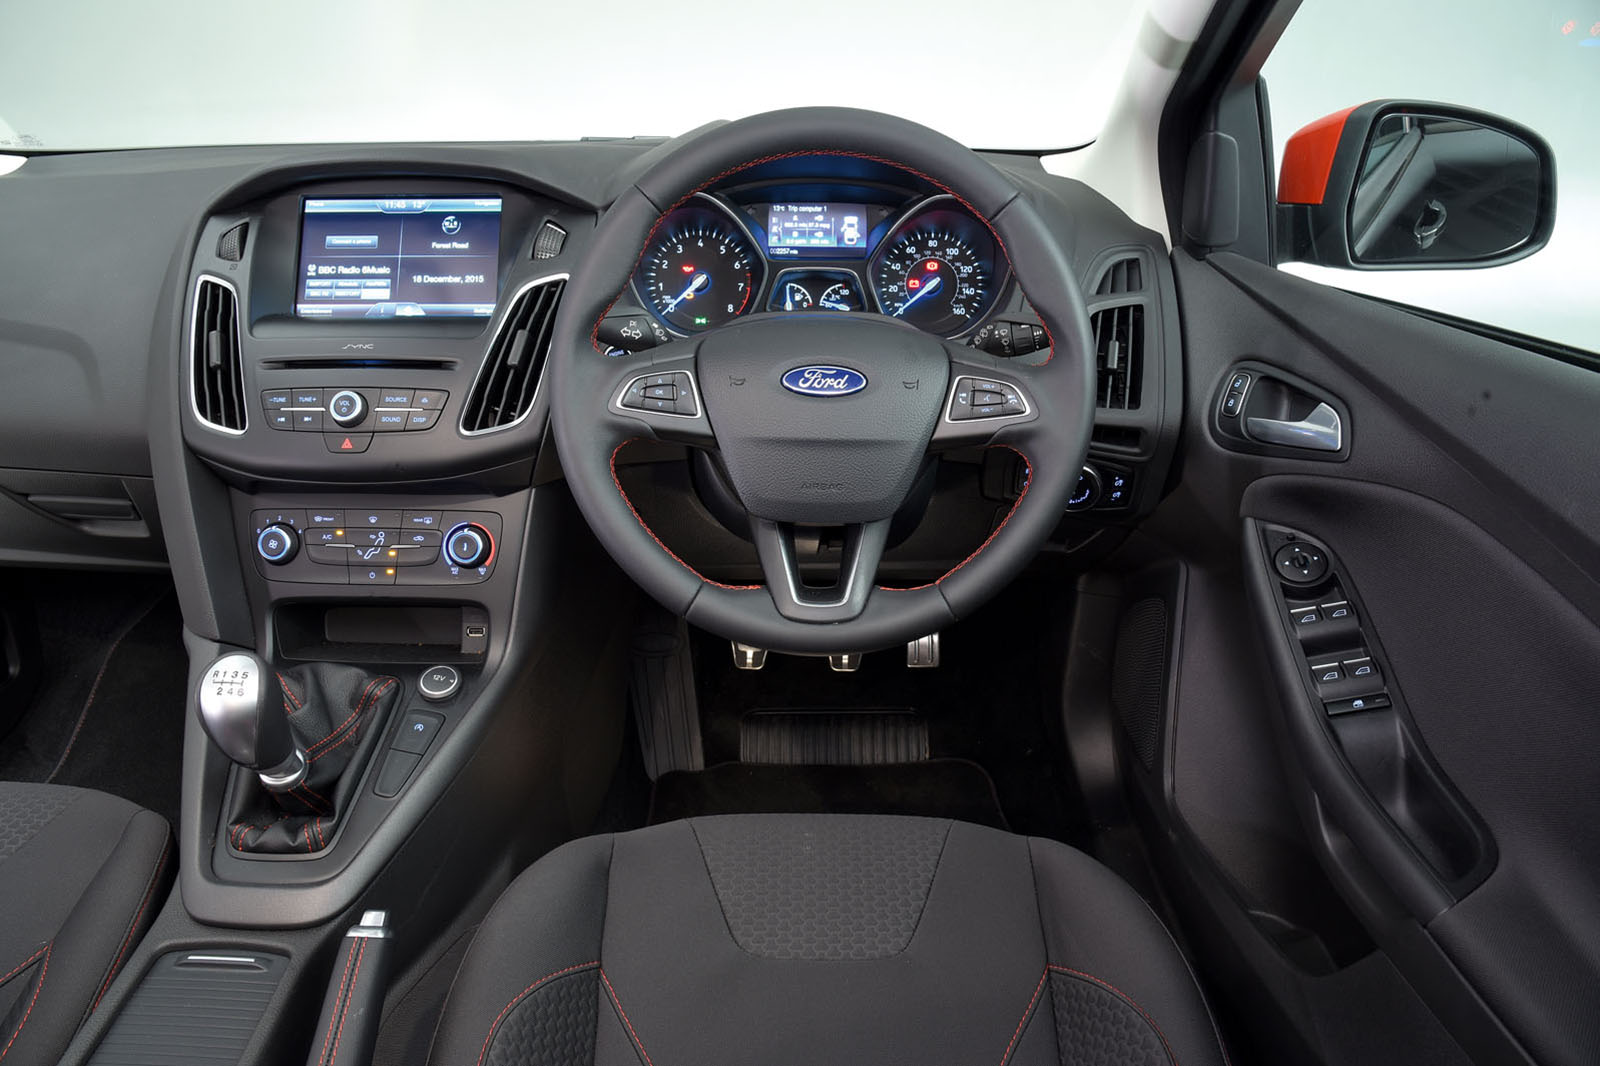 Used Ford Focus 2014-2018 review